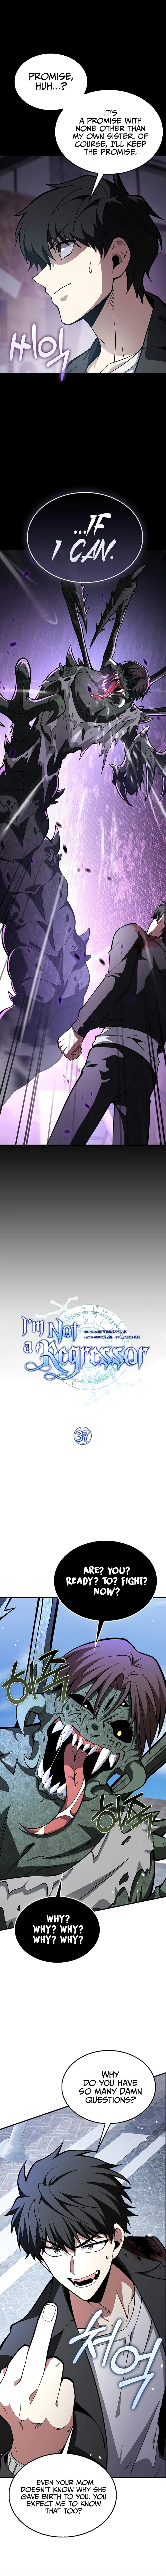 I’m Not a Regressor - Chapter 37 Page 2